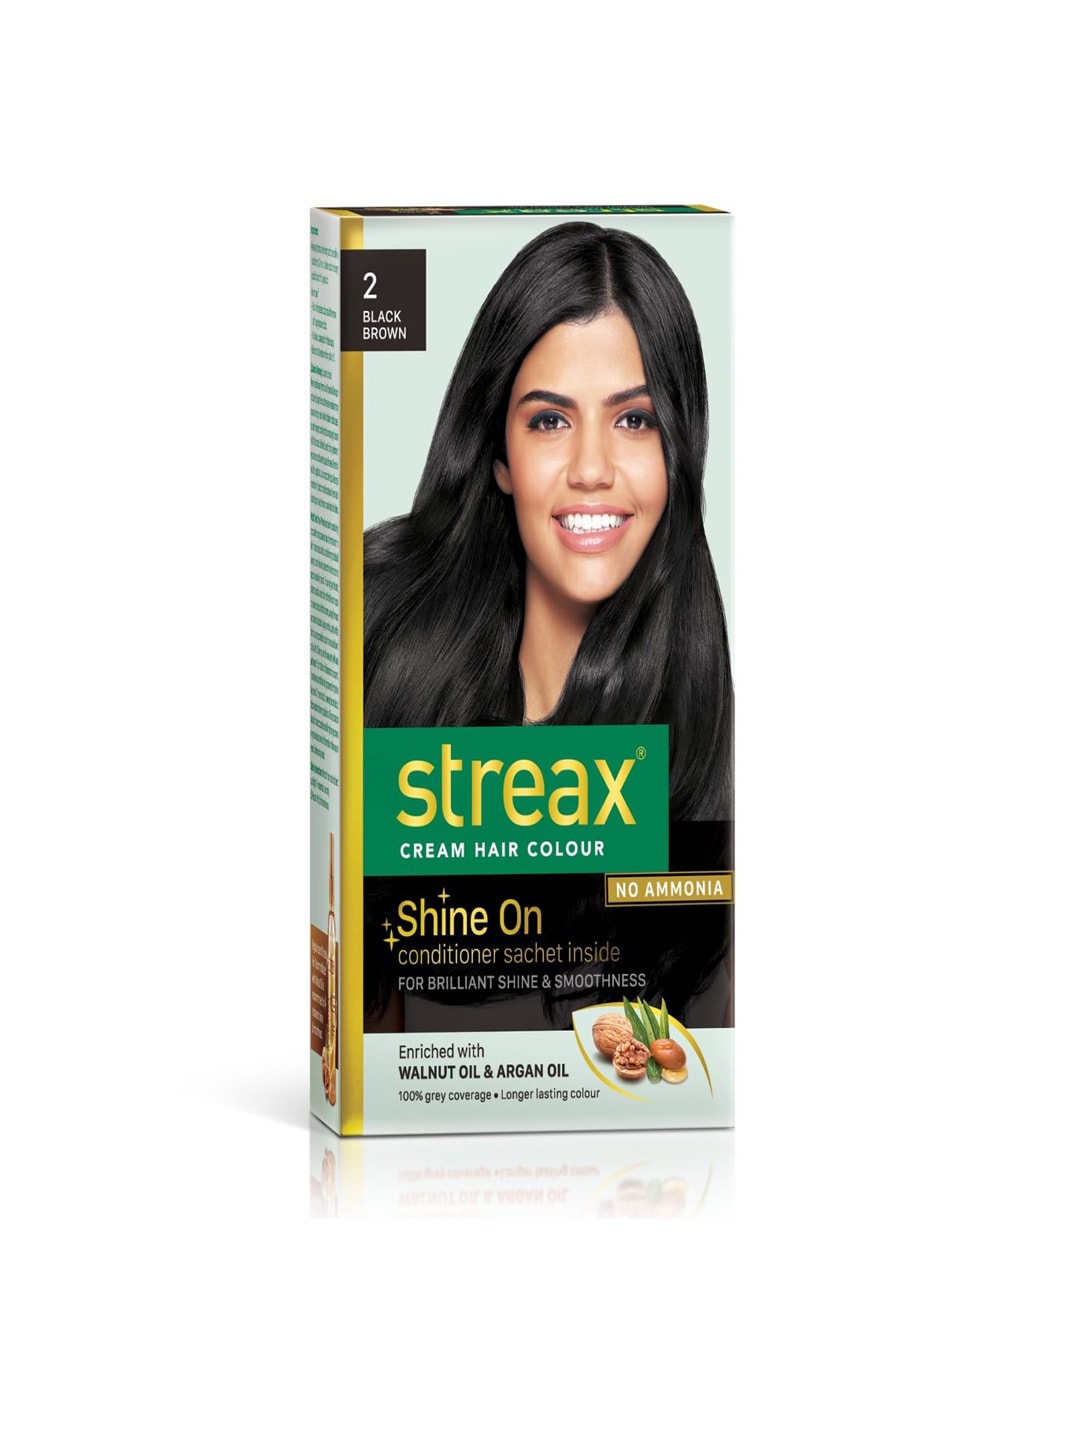 Streax Cream Hair Colour - 2 Black Brown 120ml Price in India, Full  Specifications & Offers 